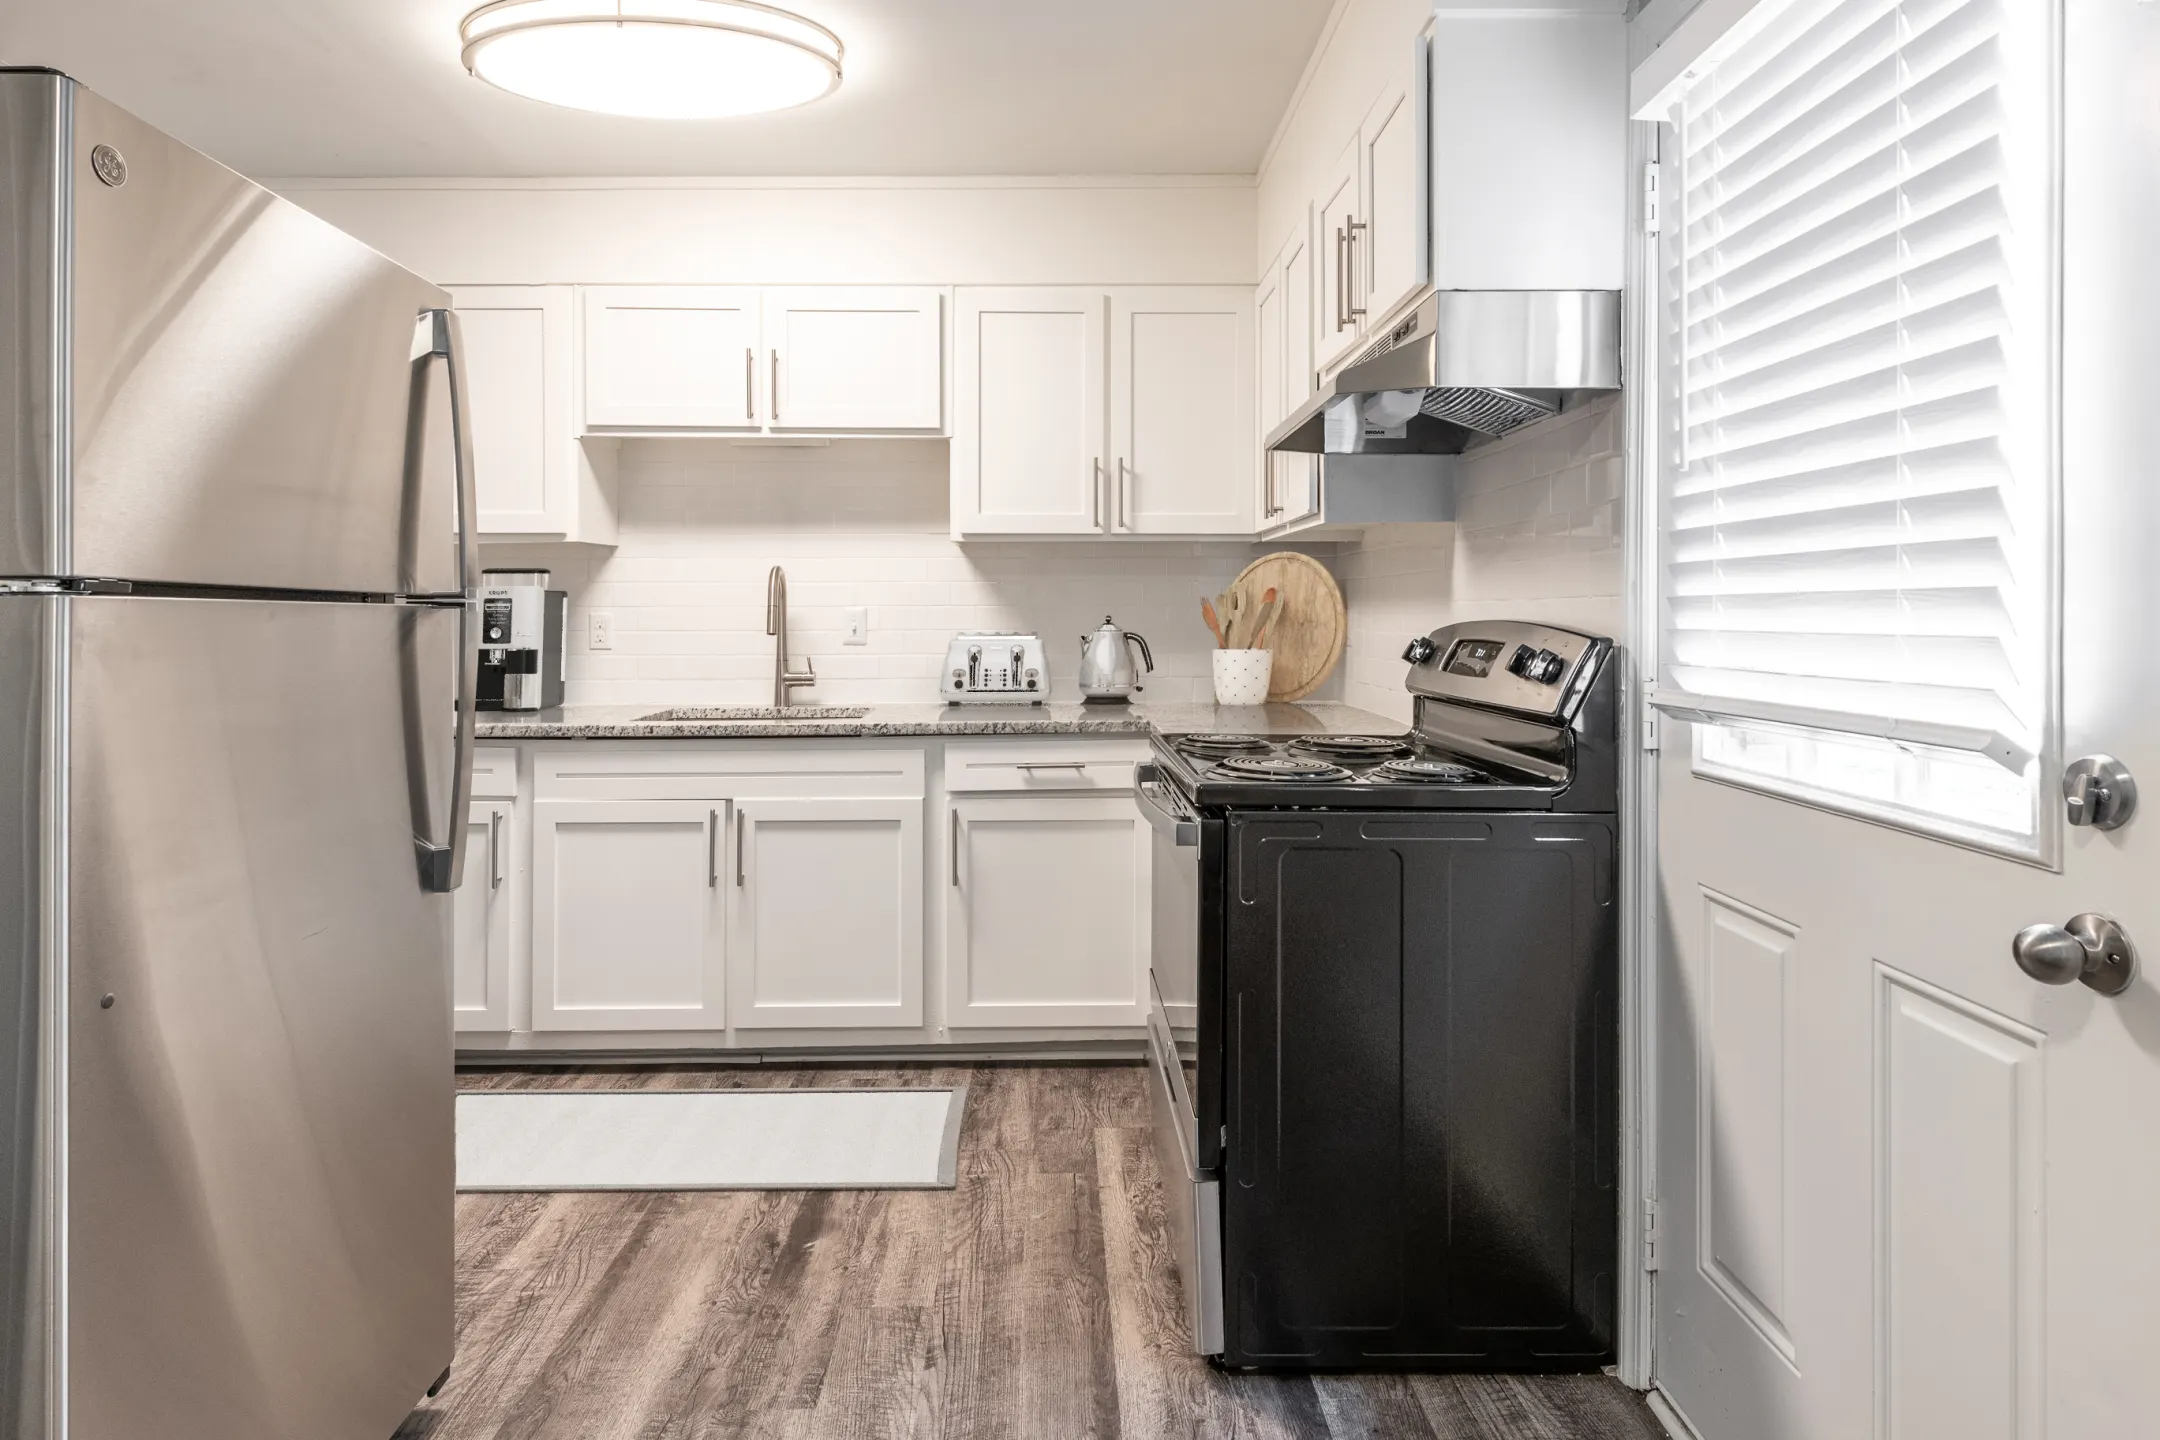 Kitchen - Sage Pointe Apartments & Townhomes - Charlotte, NC